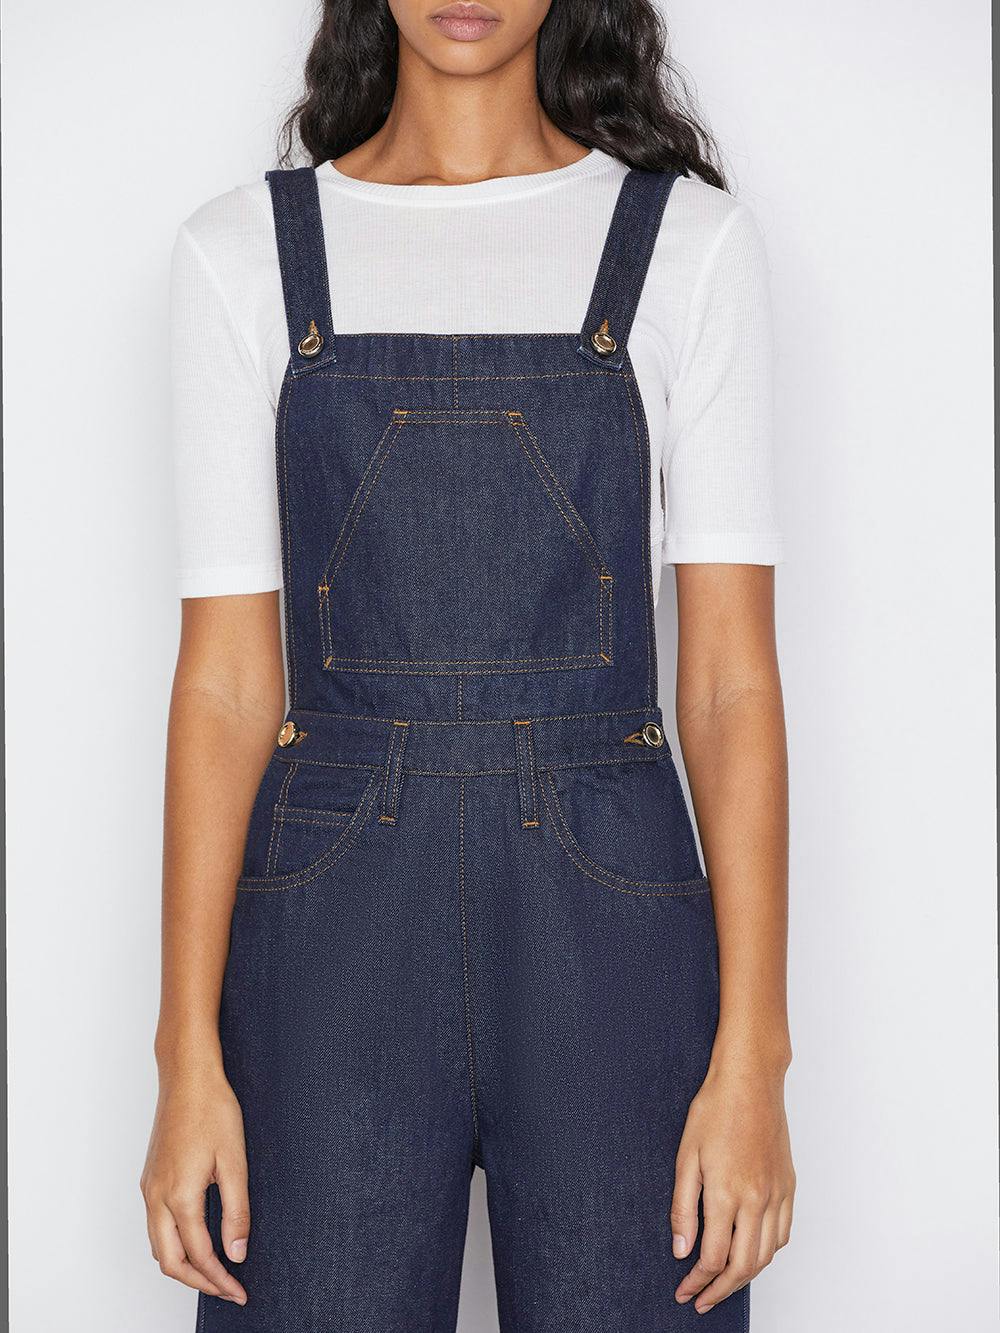 overalls front detail view